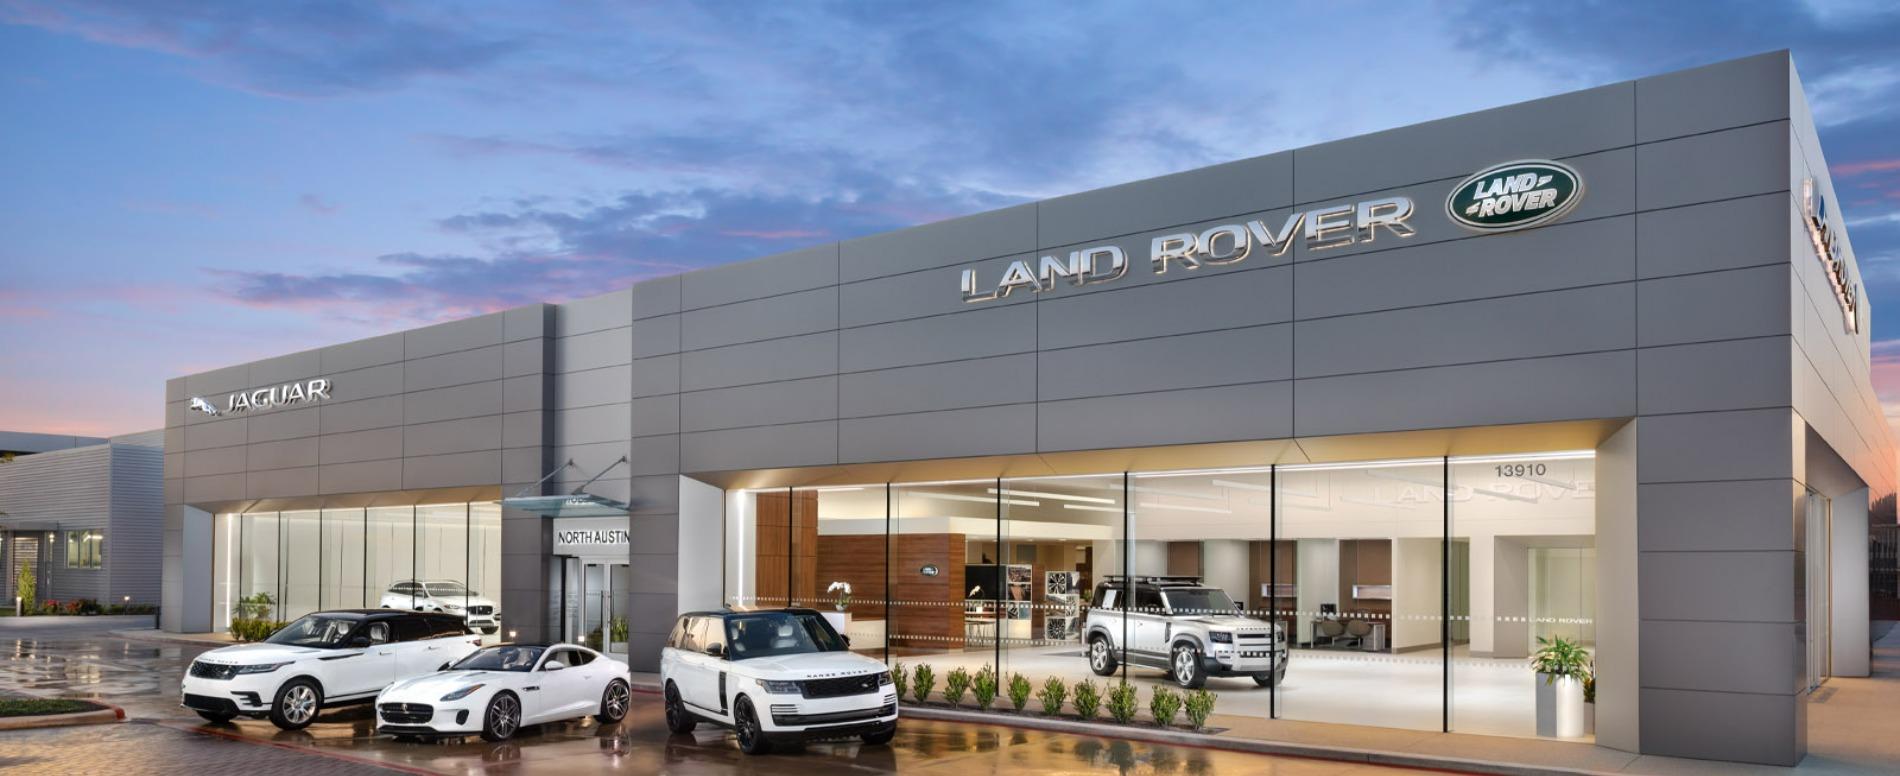 Sewell Jaguar Land Rover of North Austin Store